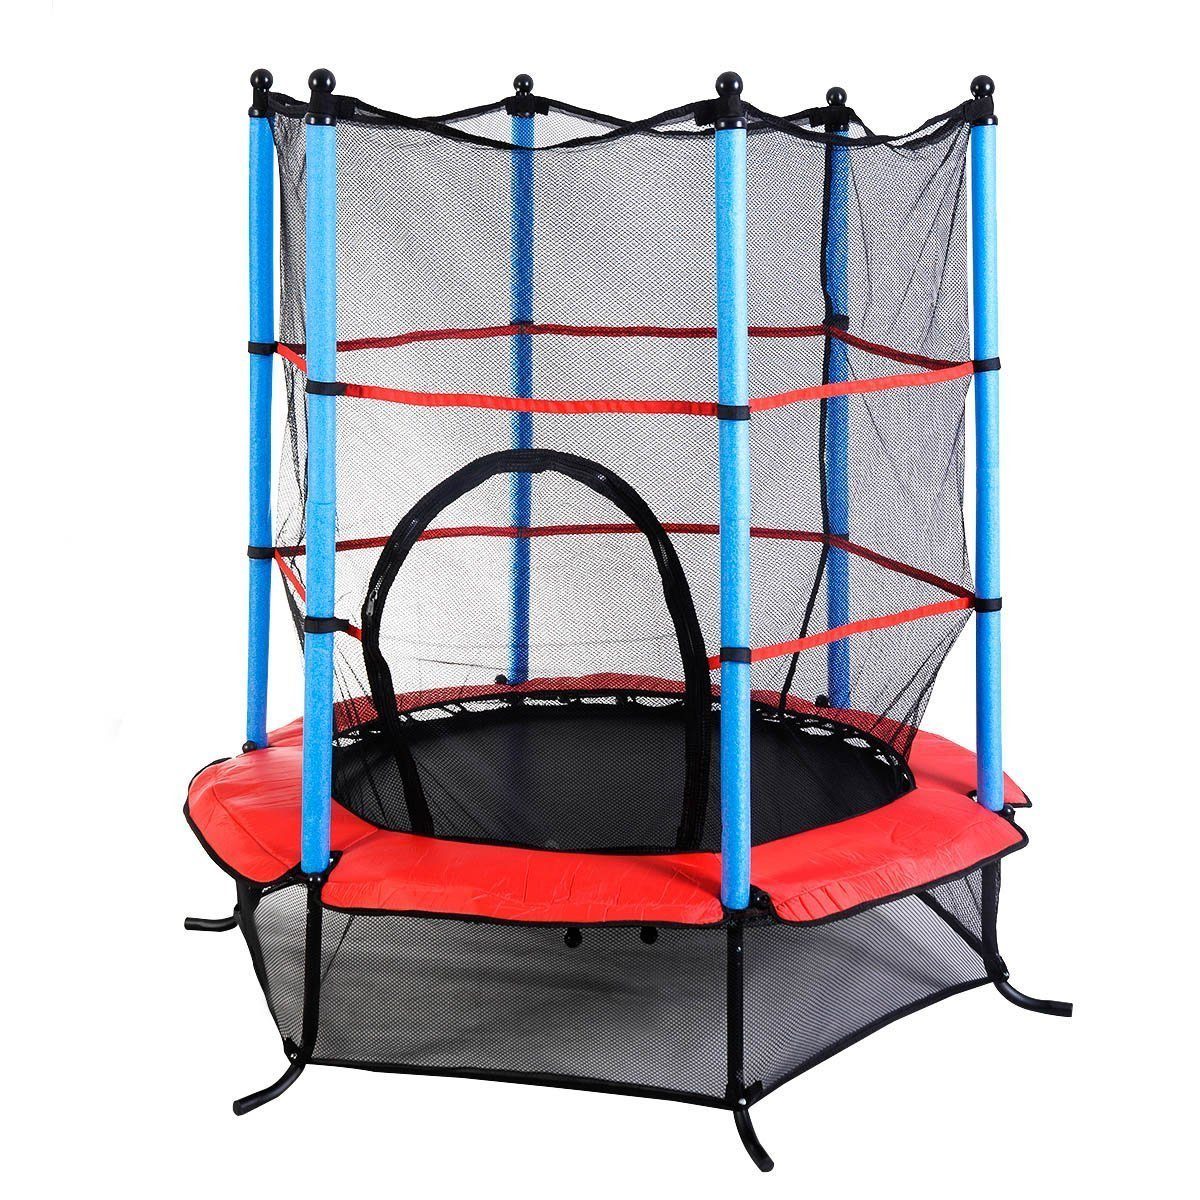 giantex-exercise-55-inch-round-kids-jumping-trampoline